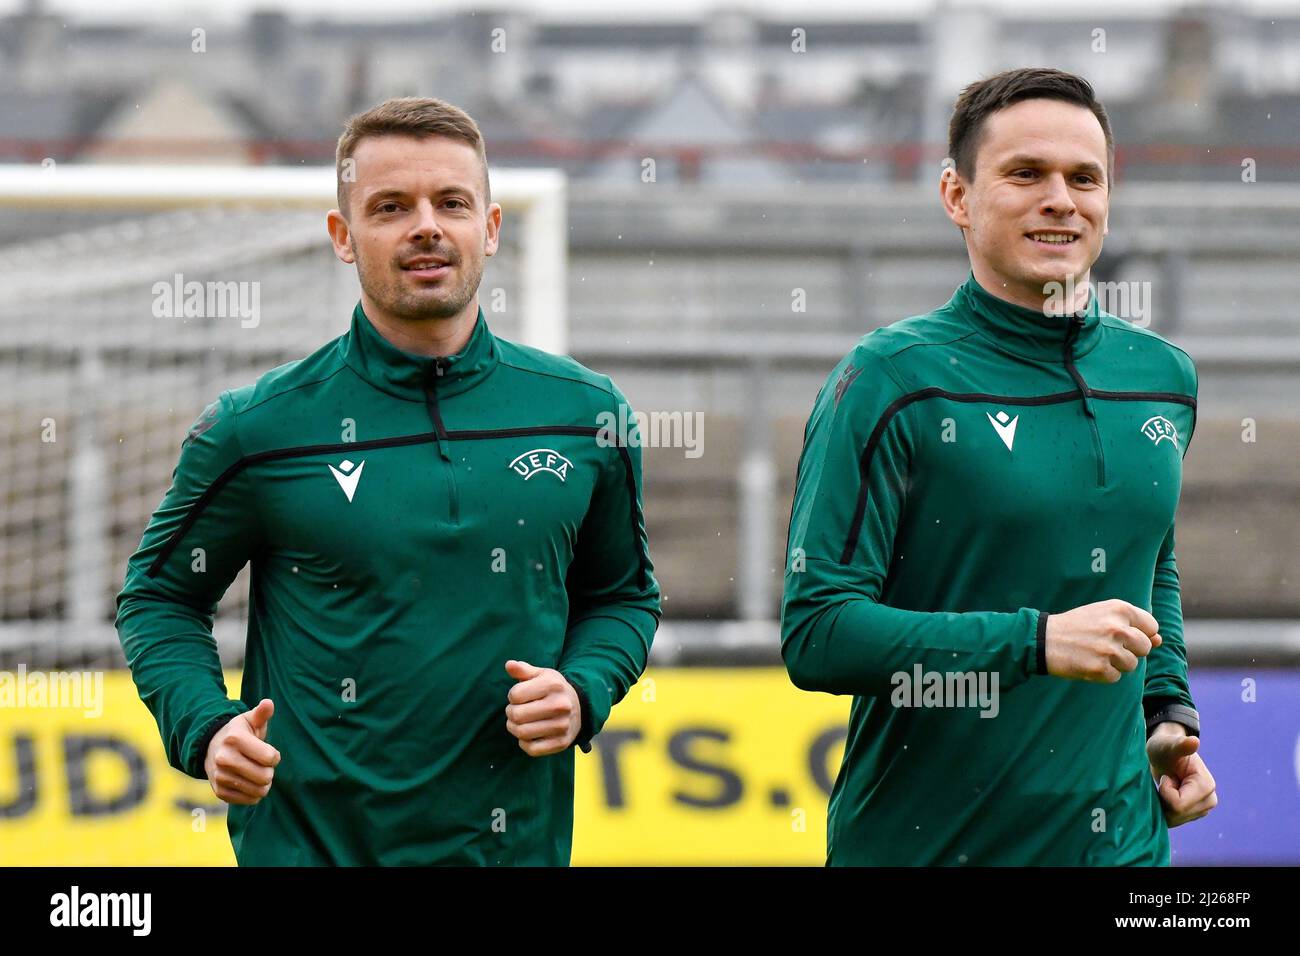 Newport, Wales. 29 March, 2022. Match Officials Pavel Orel (left) and Dan Vodrazka during the UEFA European Under-21 Championship Qualifier Group E match between Wales U21 and Bulgaria U21 at Rodney Parade in Newport, Wales, UK on 29, March 2022. Credit: Duncan Thomas/Majestic Media. Stock Photo